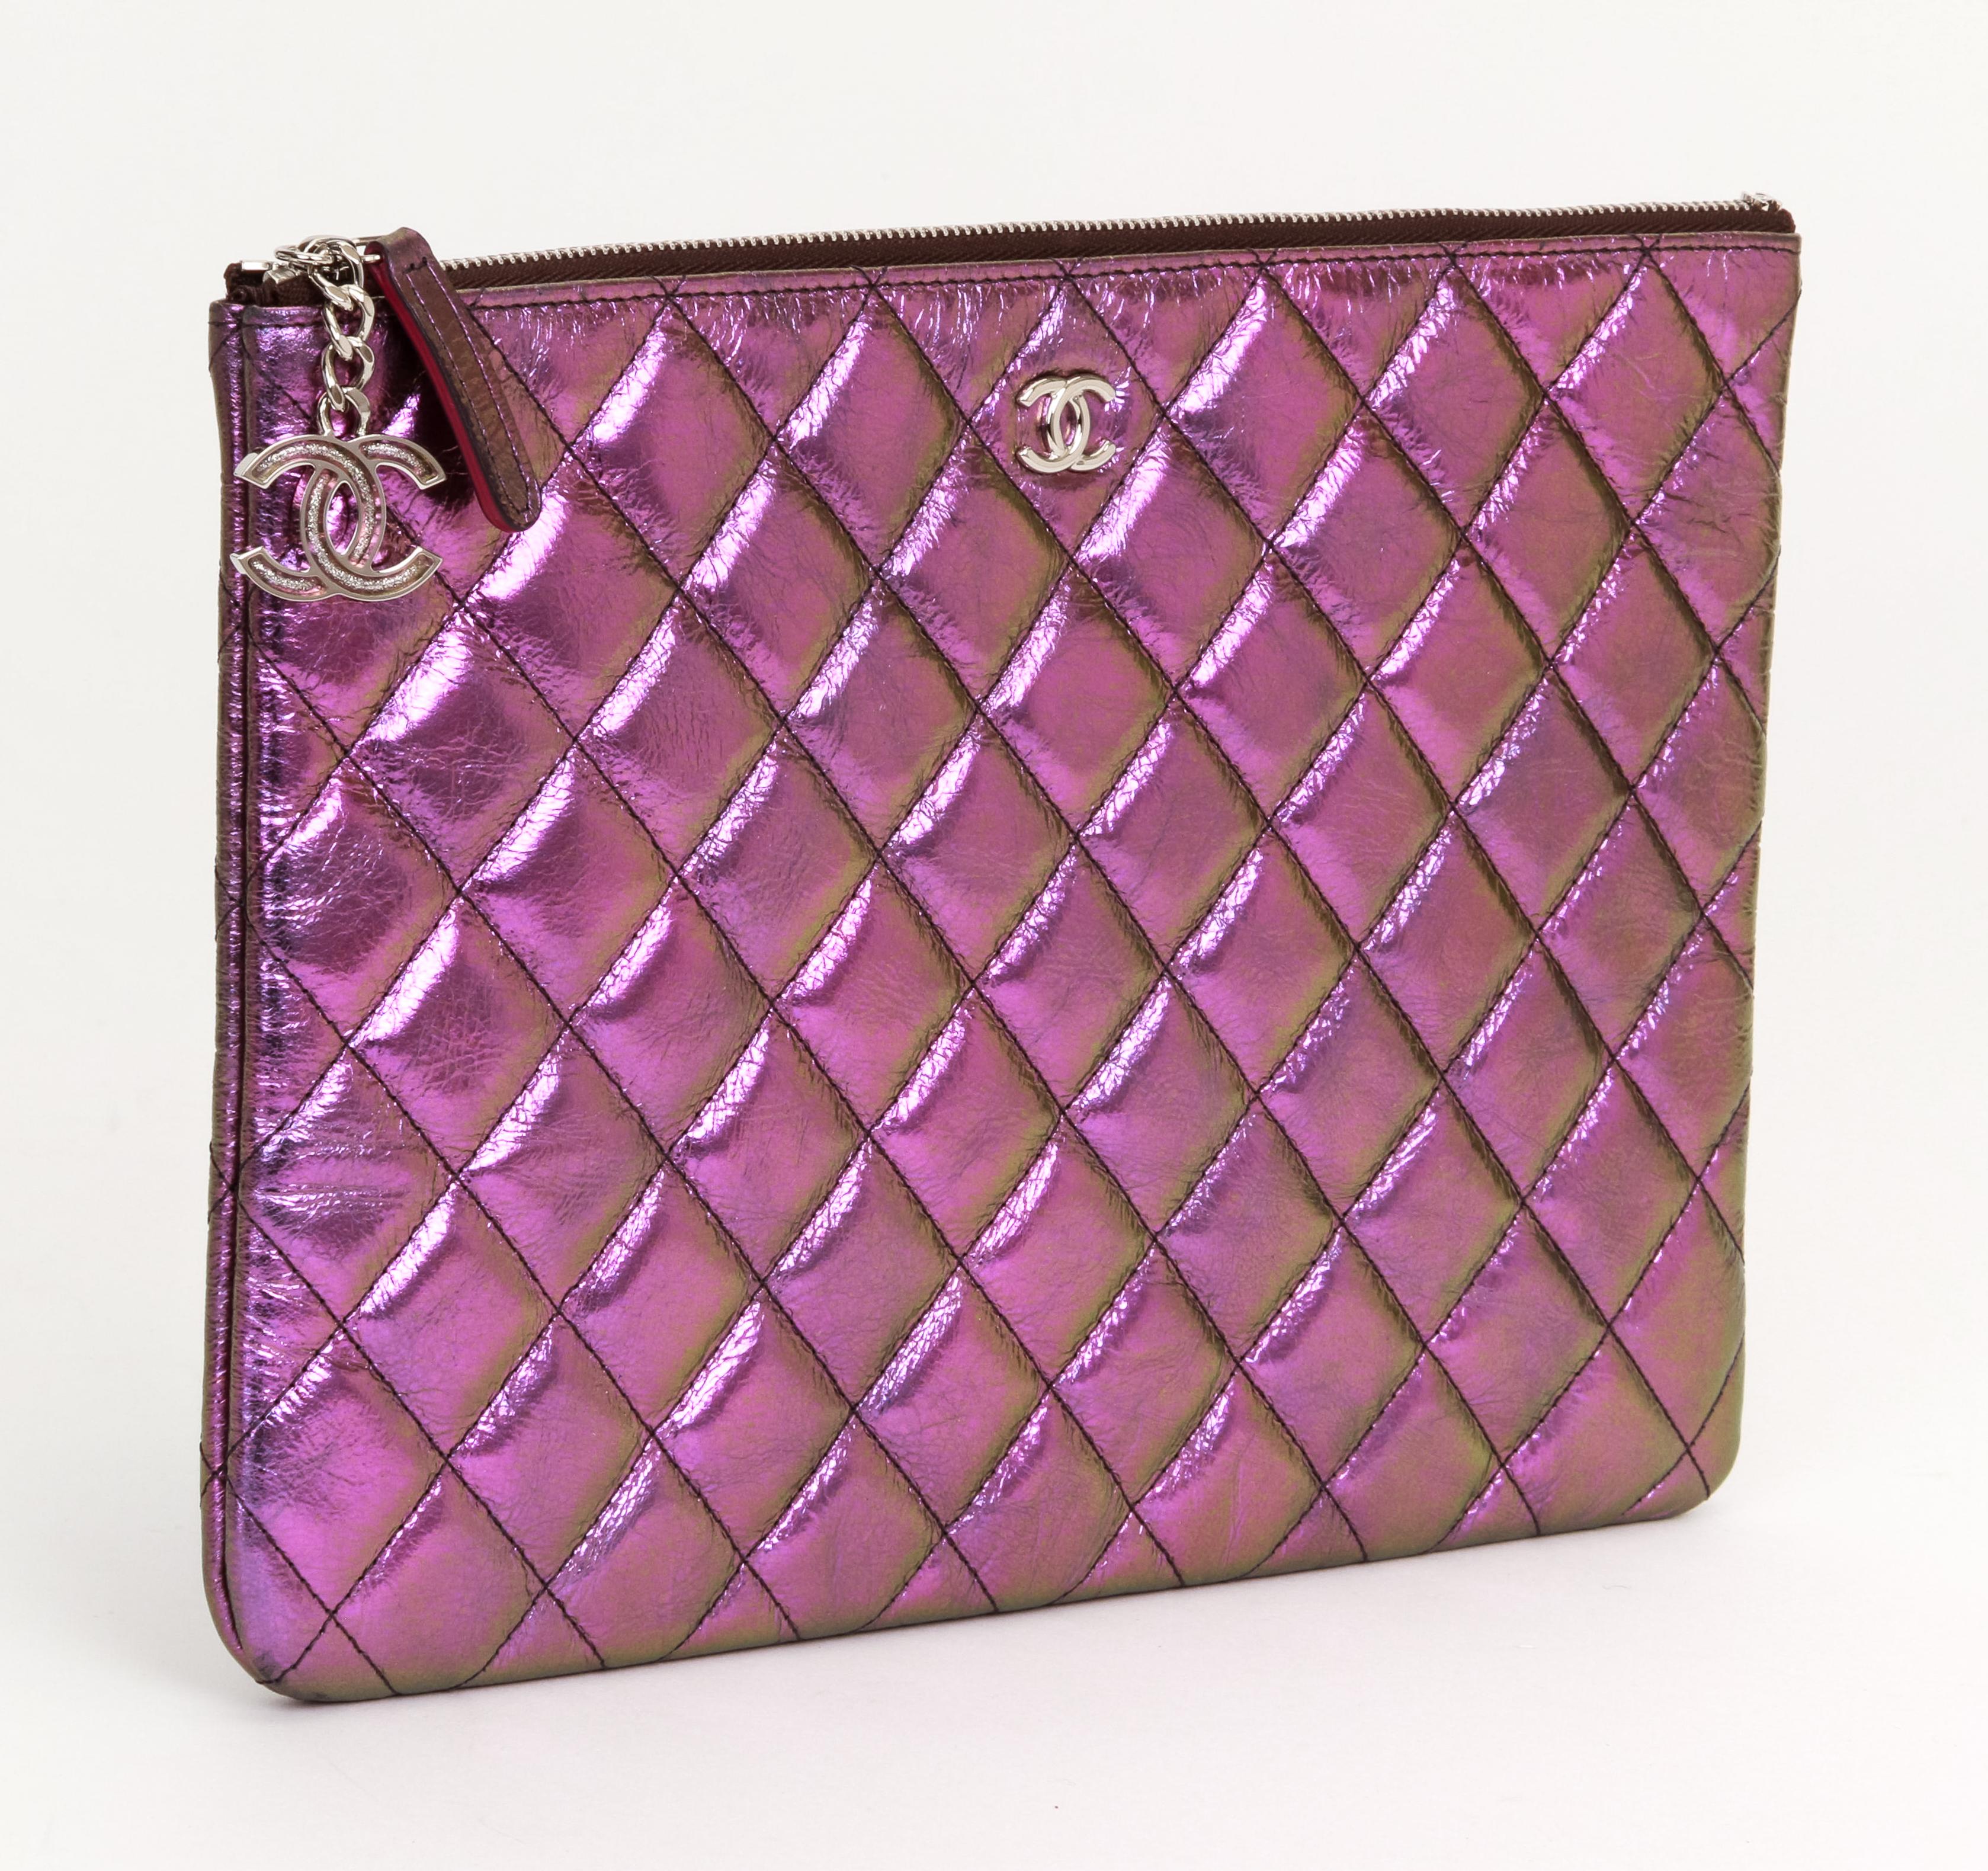 Chanel new purple iridescent quilted metallic clutch. Enamel shiny charm zipper pull. Collection 2019. Never worn, comes with hologram, id card and generic dust cover.